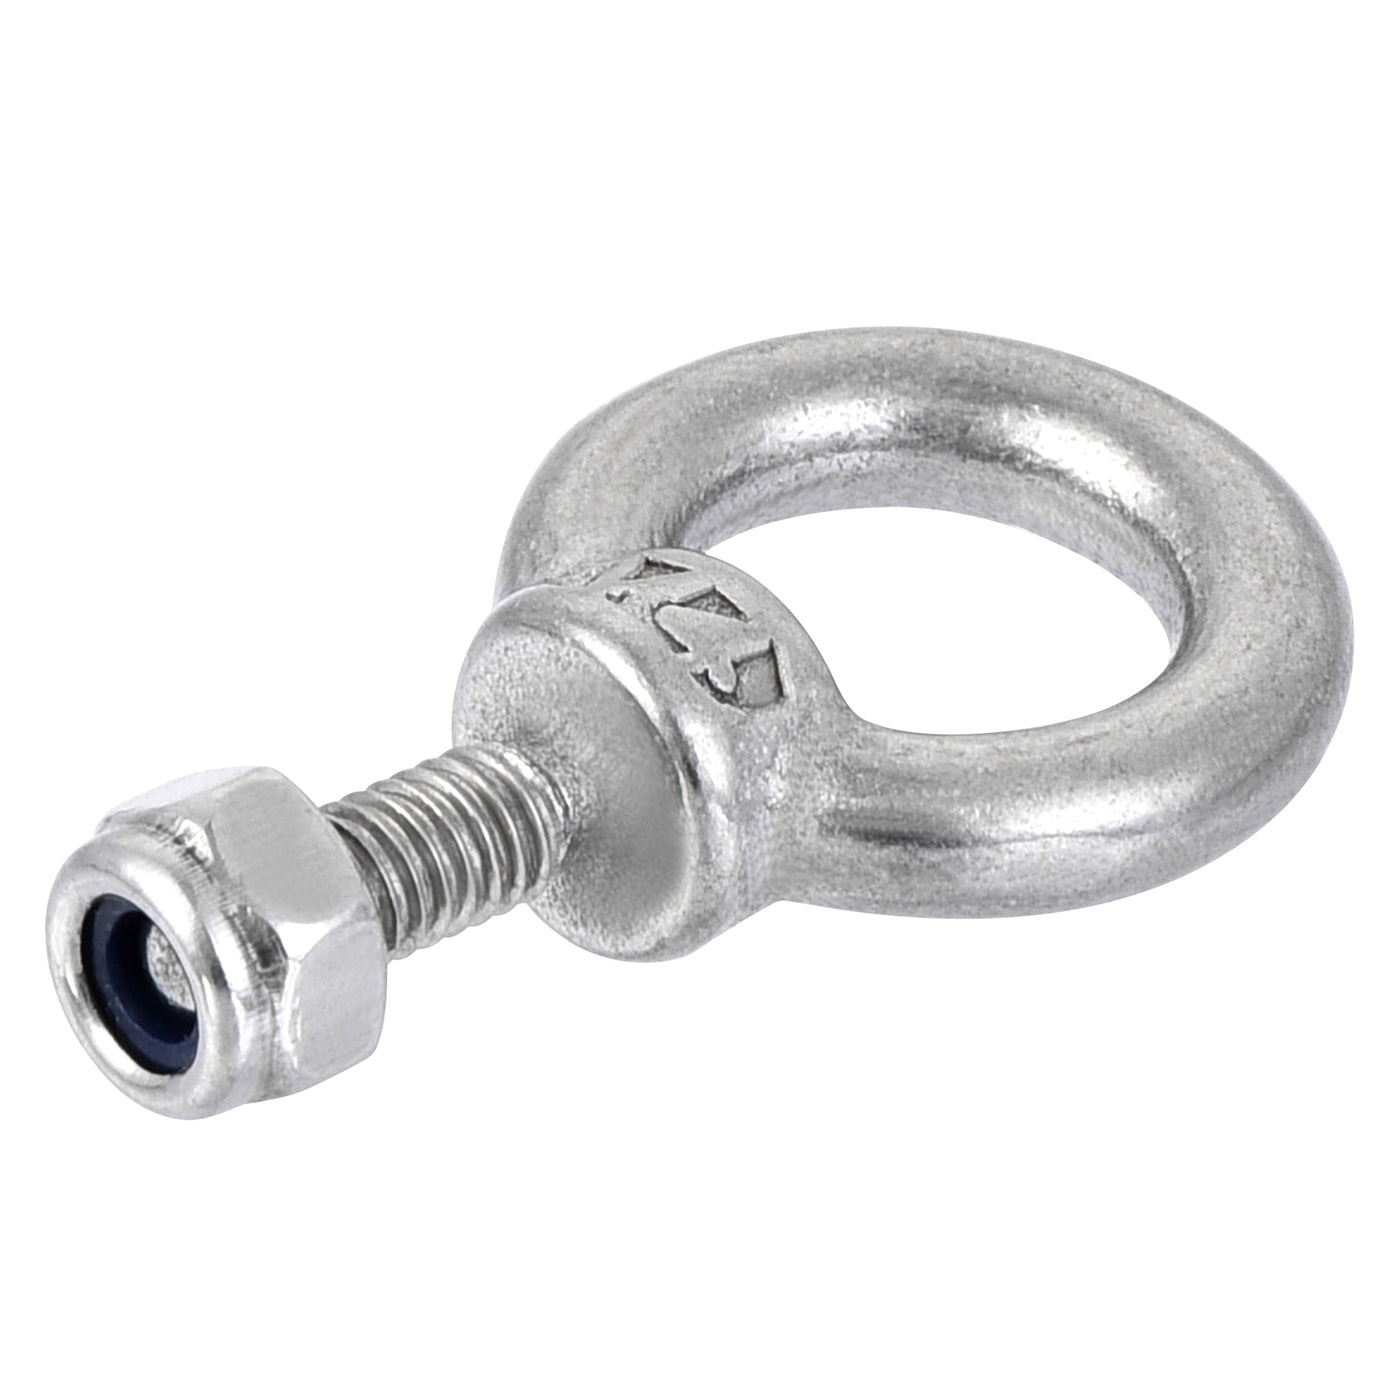 uxcell Uxcell Lifting Eye Bolt M Male Thread with Hex Screw Nut for Hanging, 304 Stainless Steel, 4 Sets